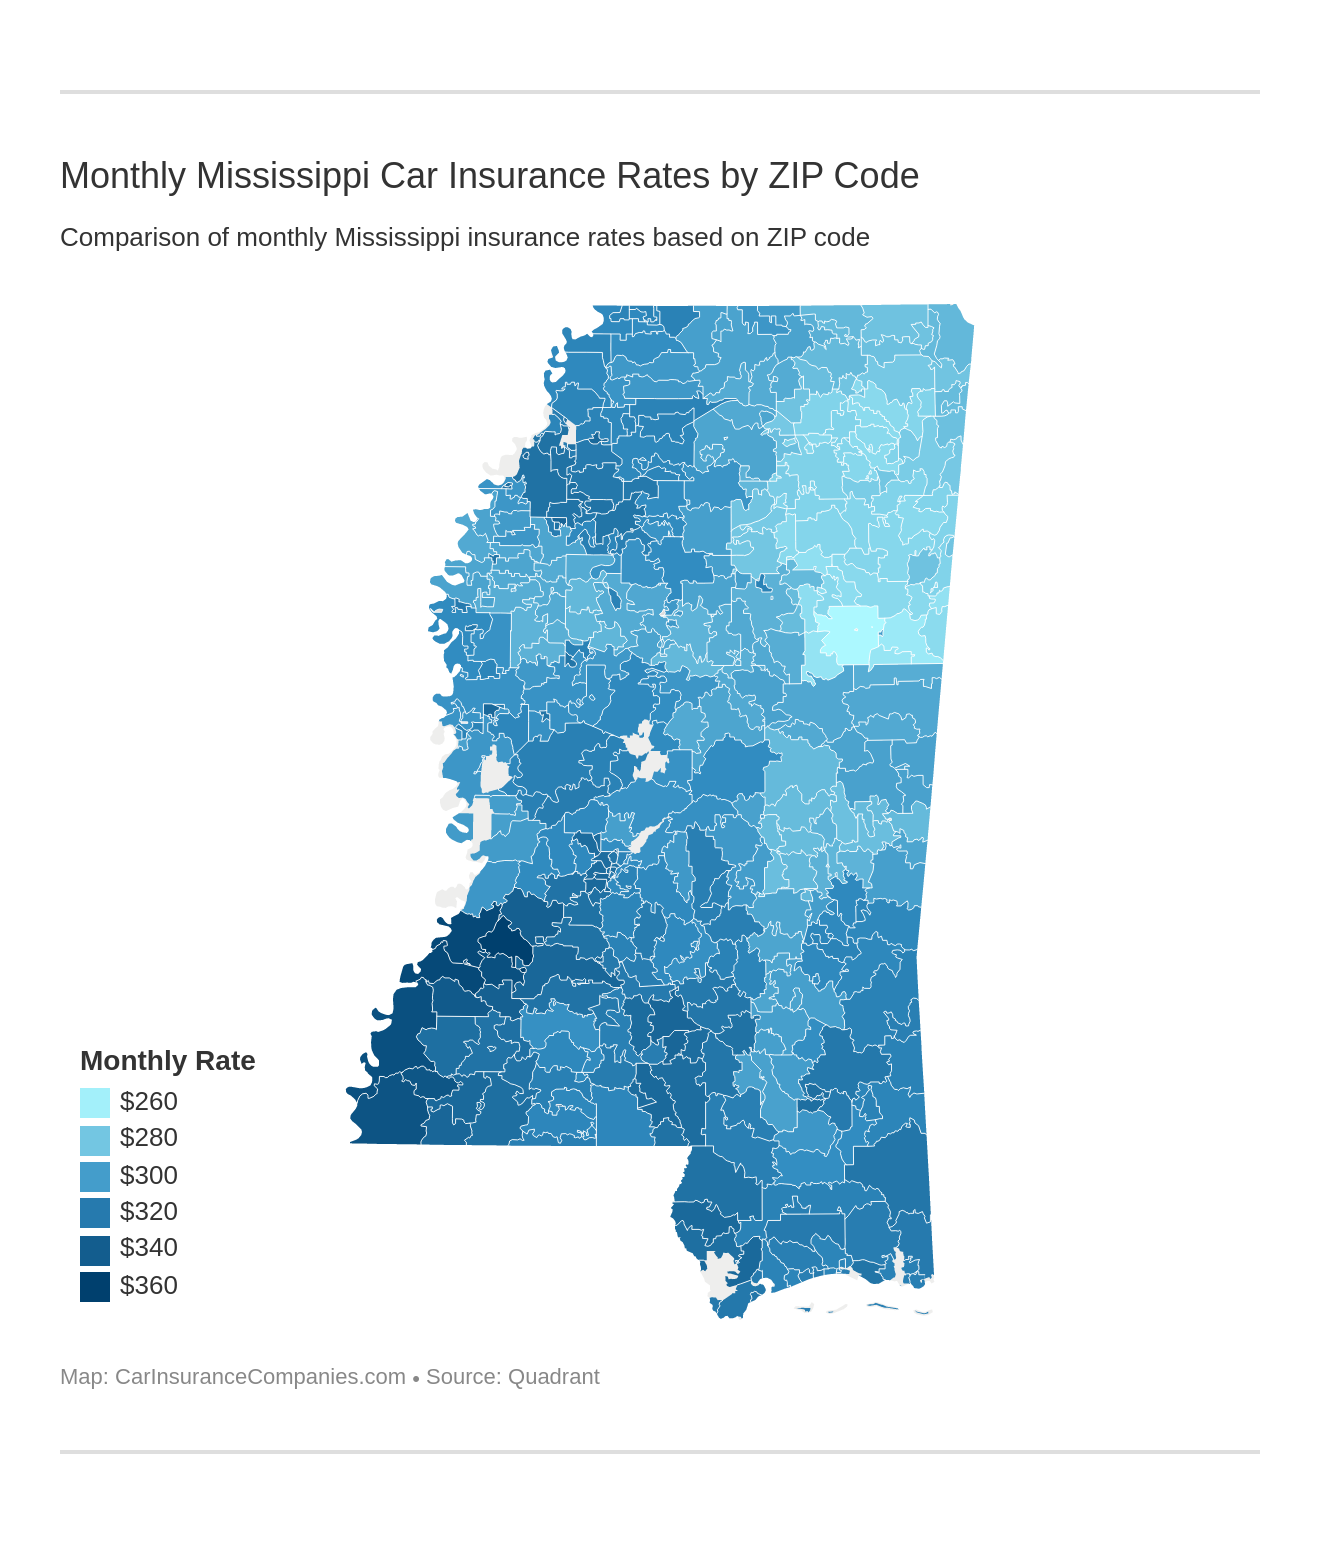 Monthly Mississippi Car Insurance Rates by ZIP Code